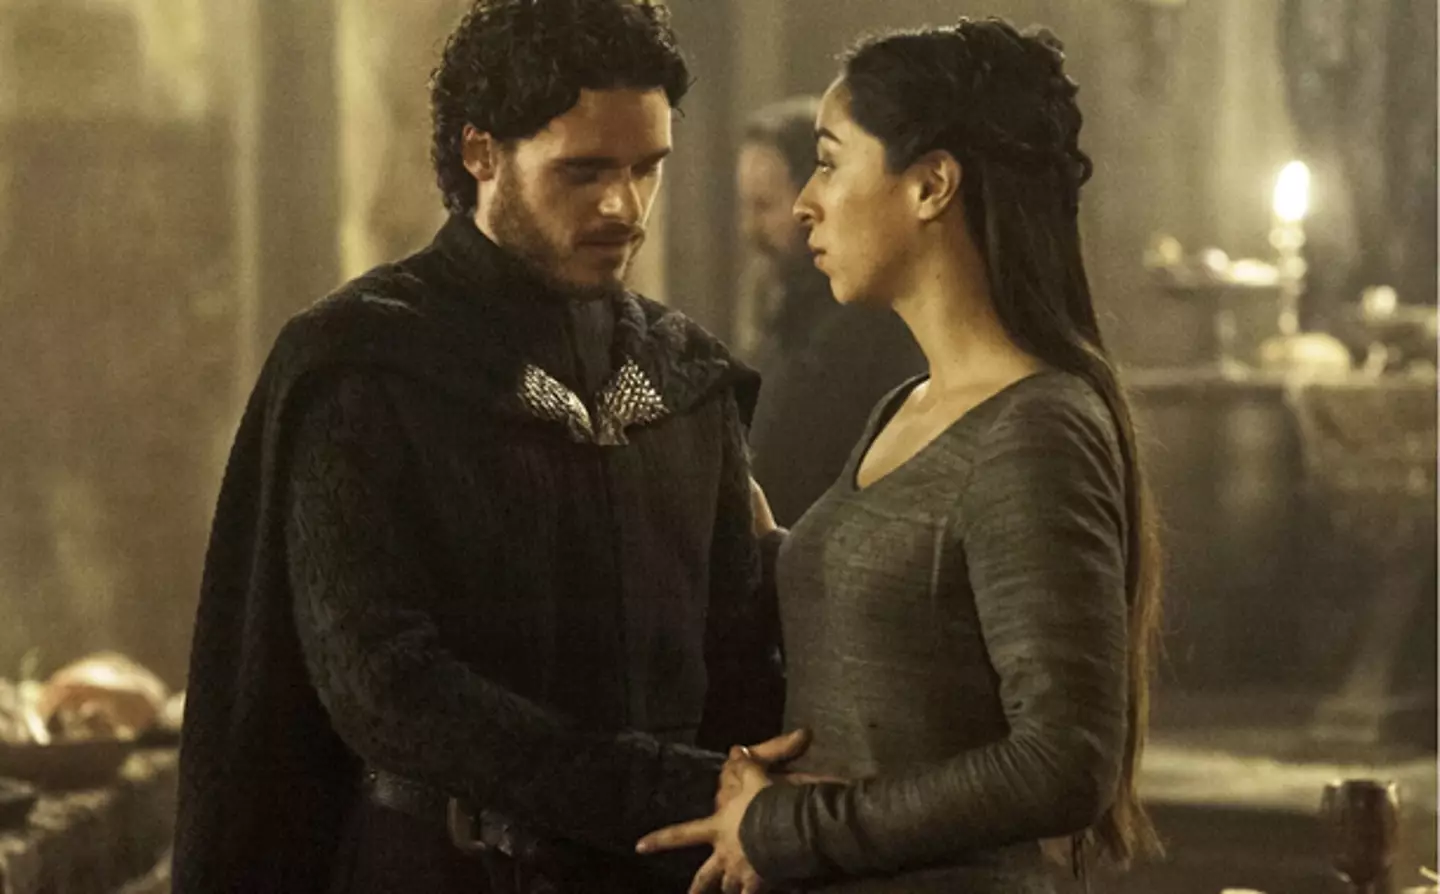 Richard Madden and Oona Chaplin met their Game of Thrones end at the Red Wedding.